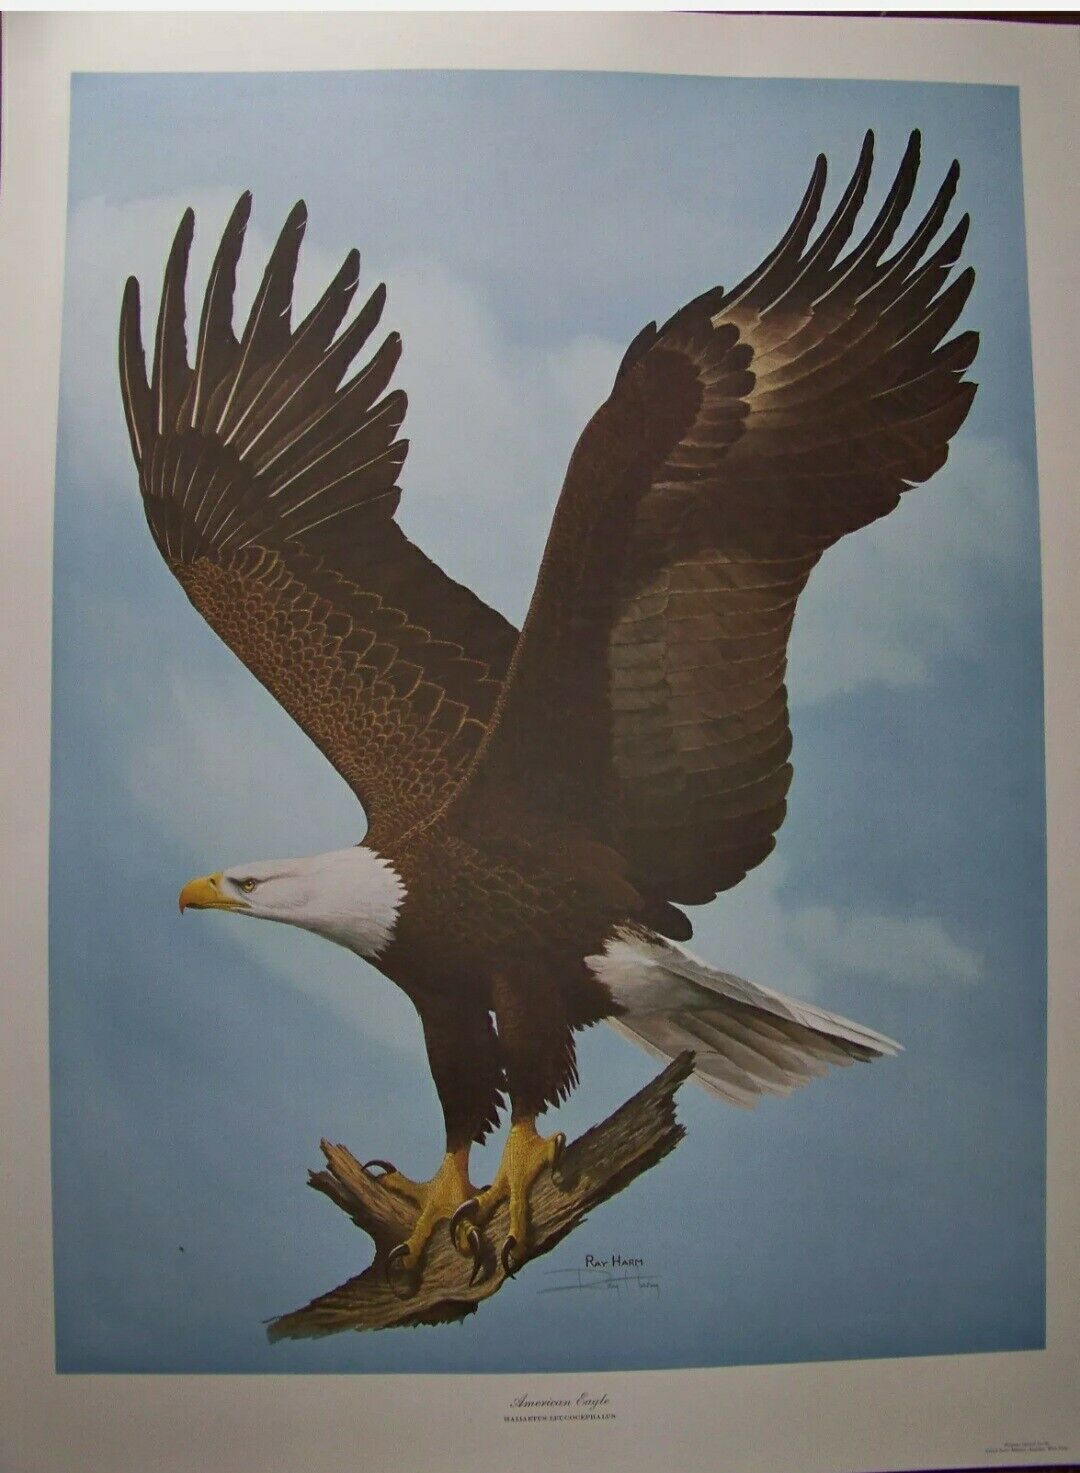 RAY HARM BALD EAGLE WEST POINT EDITION- 50 YEAR OLD PRINT- MINT CONDITION- RARE 